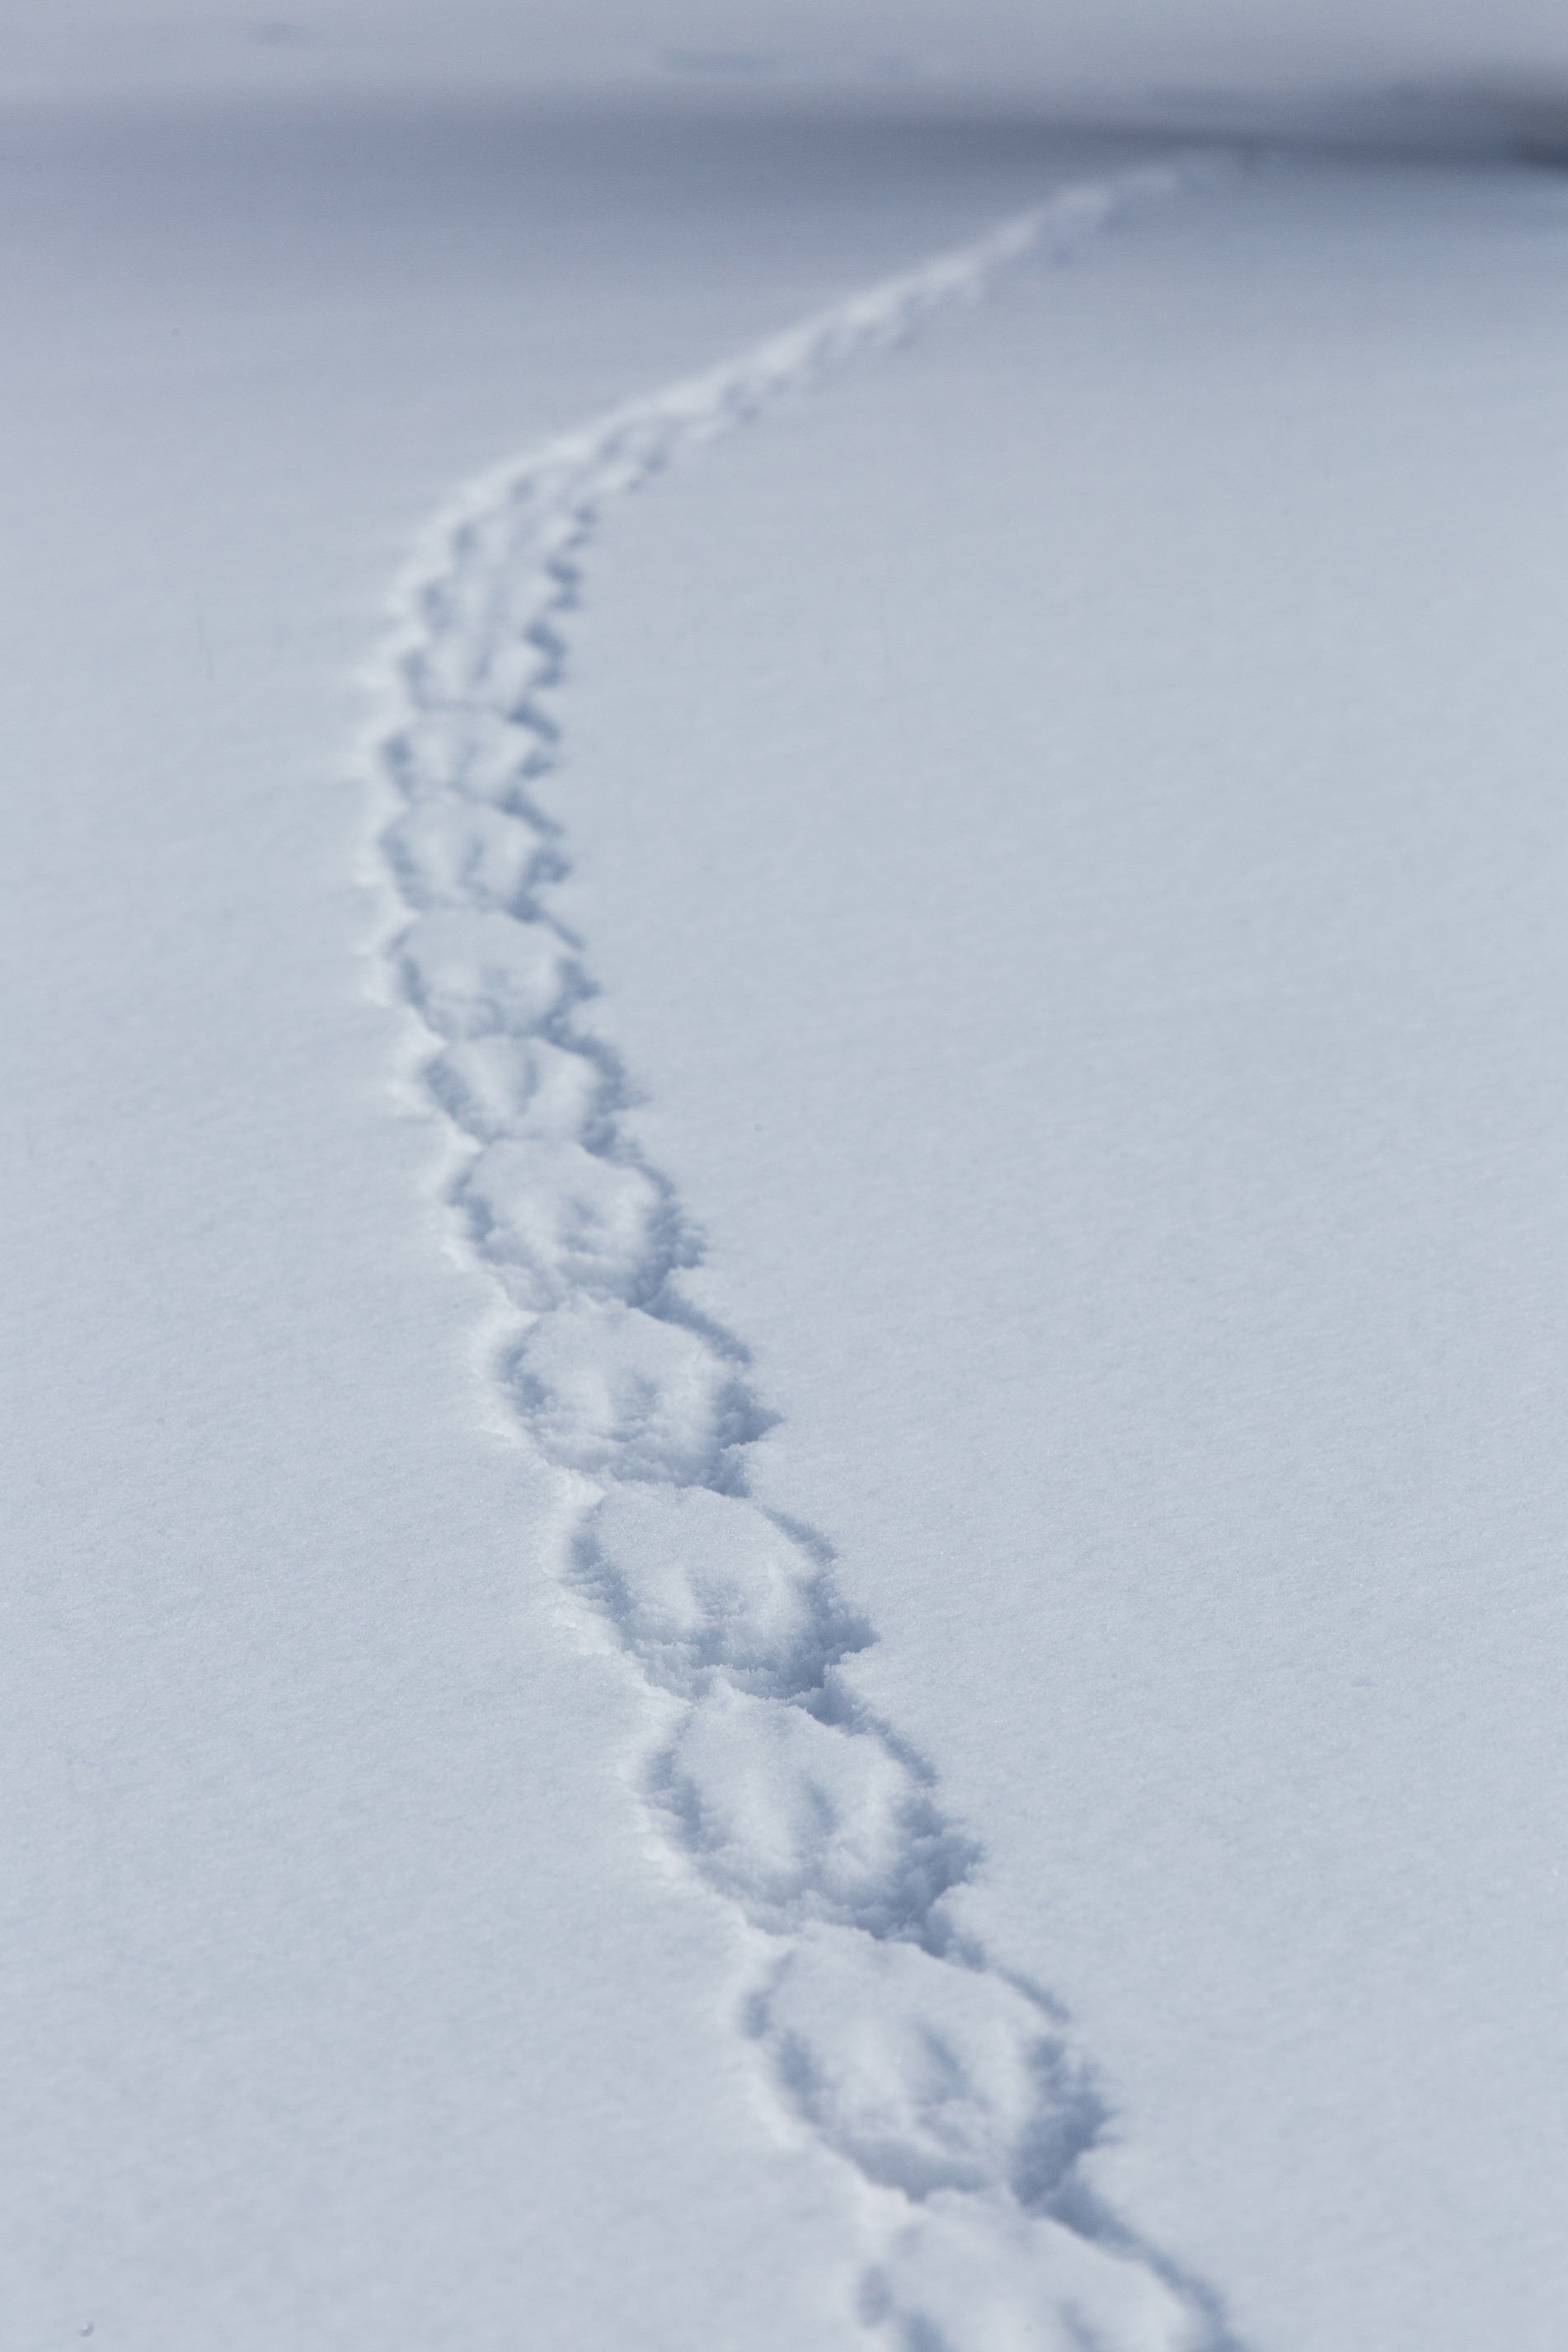 Tracks in sets of four cross the snow